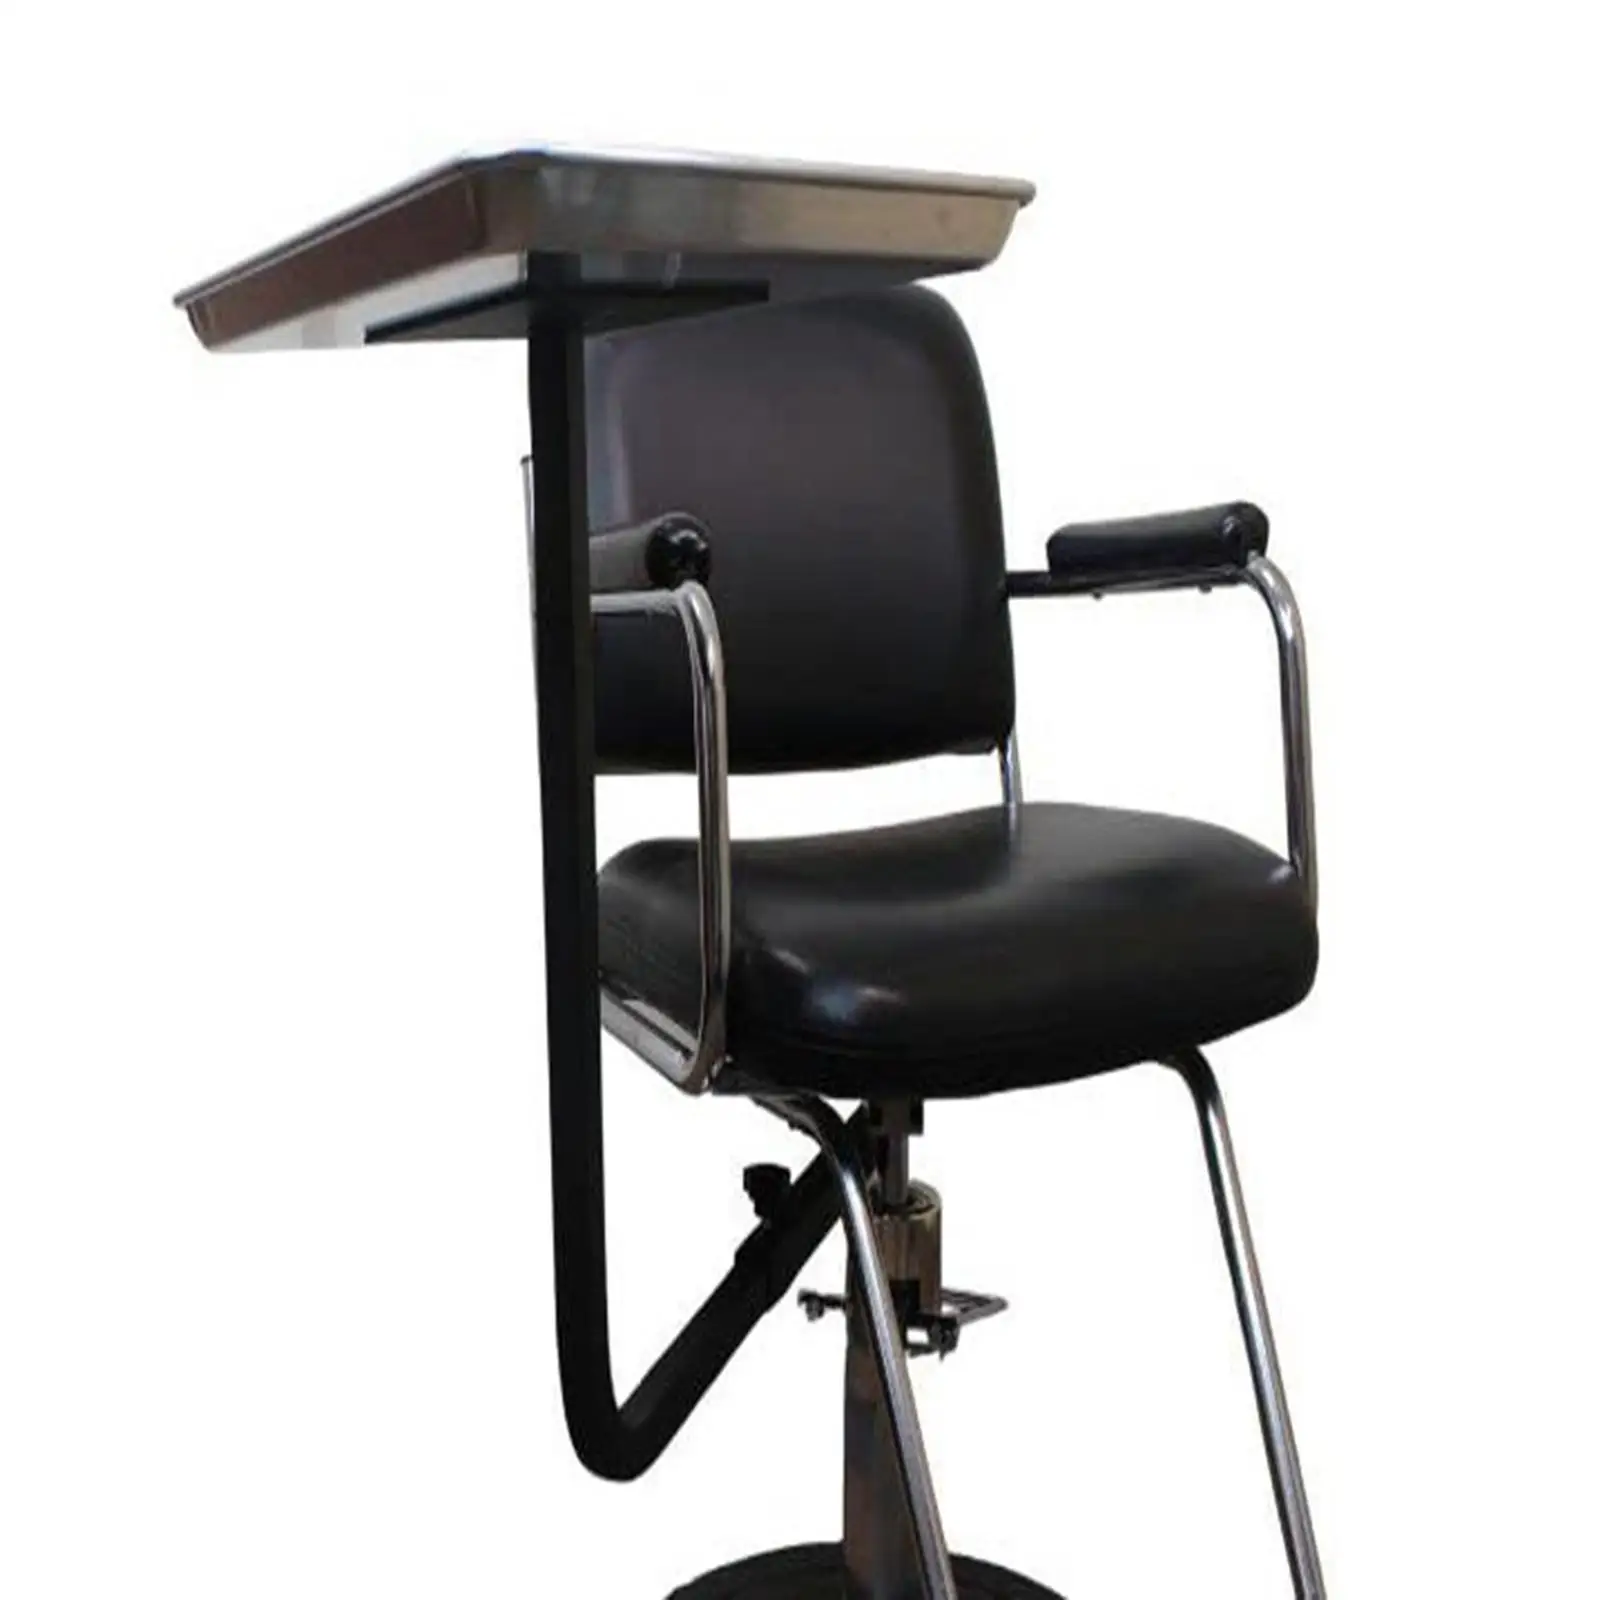 

Salon Chair Attachment Adjustable Barber Chair Tray for Coloring Bowls Hair Stylist Various Combs Hairdressing Tools Hair Dryers